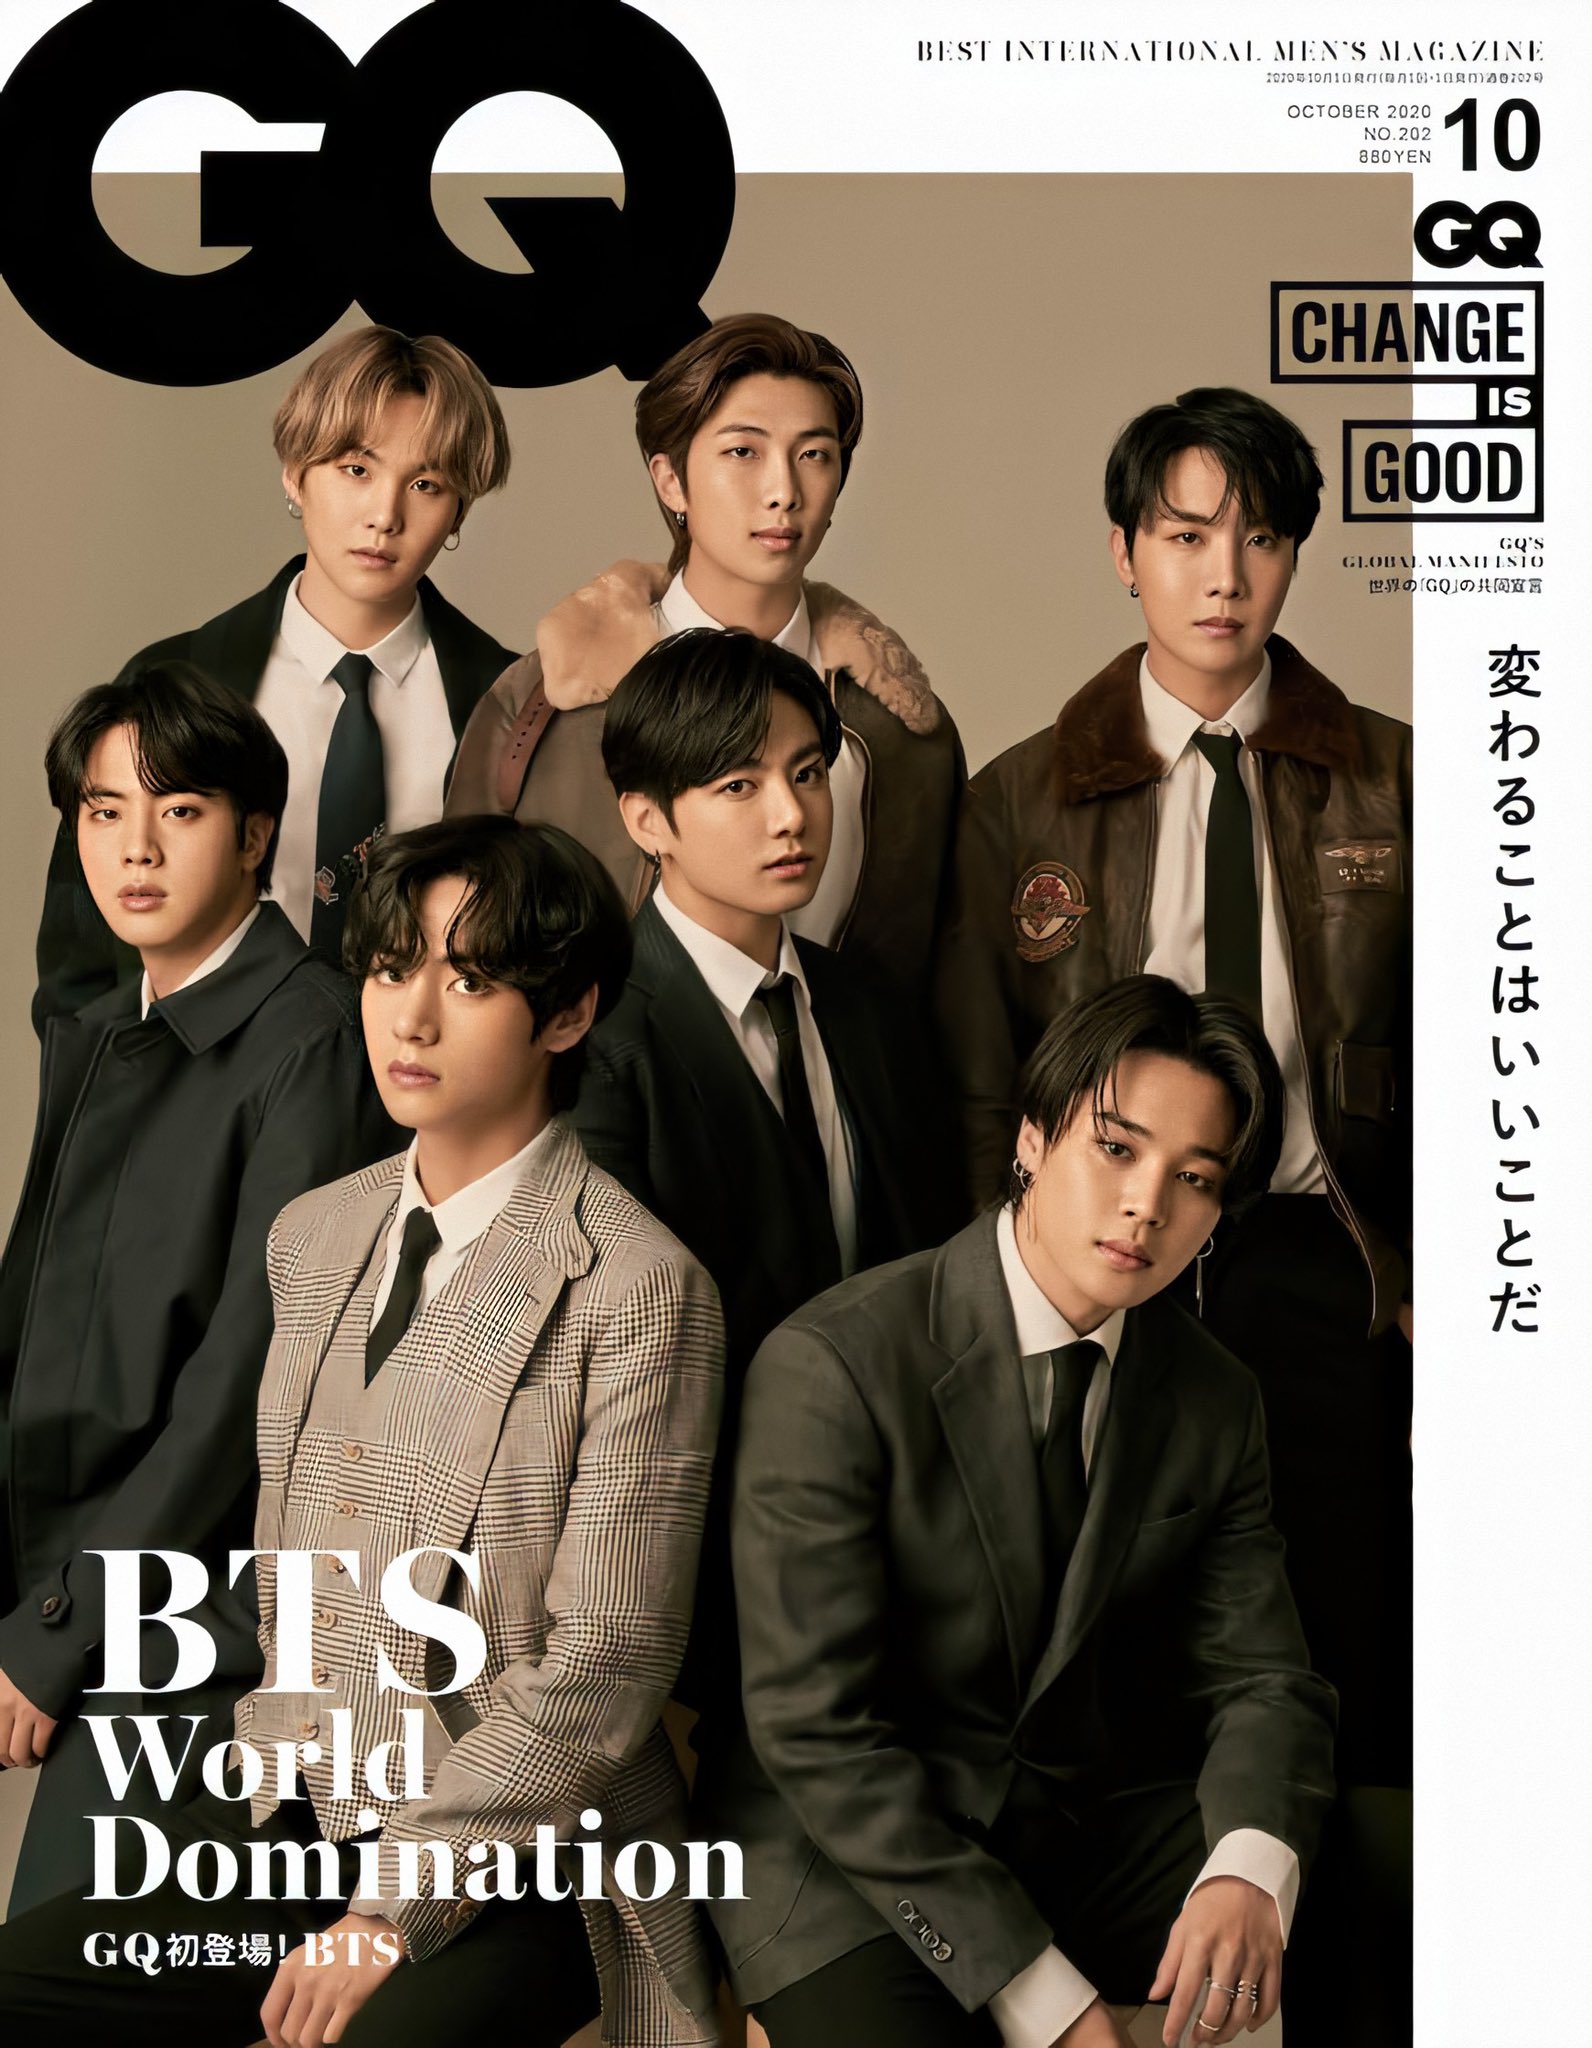 Becomes the Magazine Cover of October Edition, GQ Japan Calls BTS 'Dominating The World'